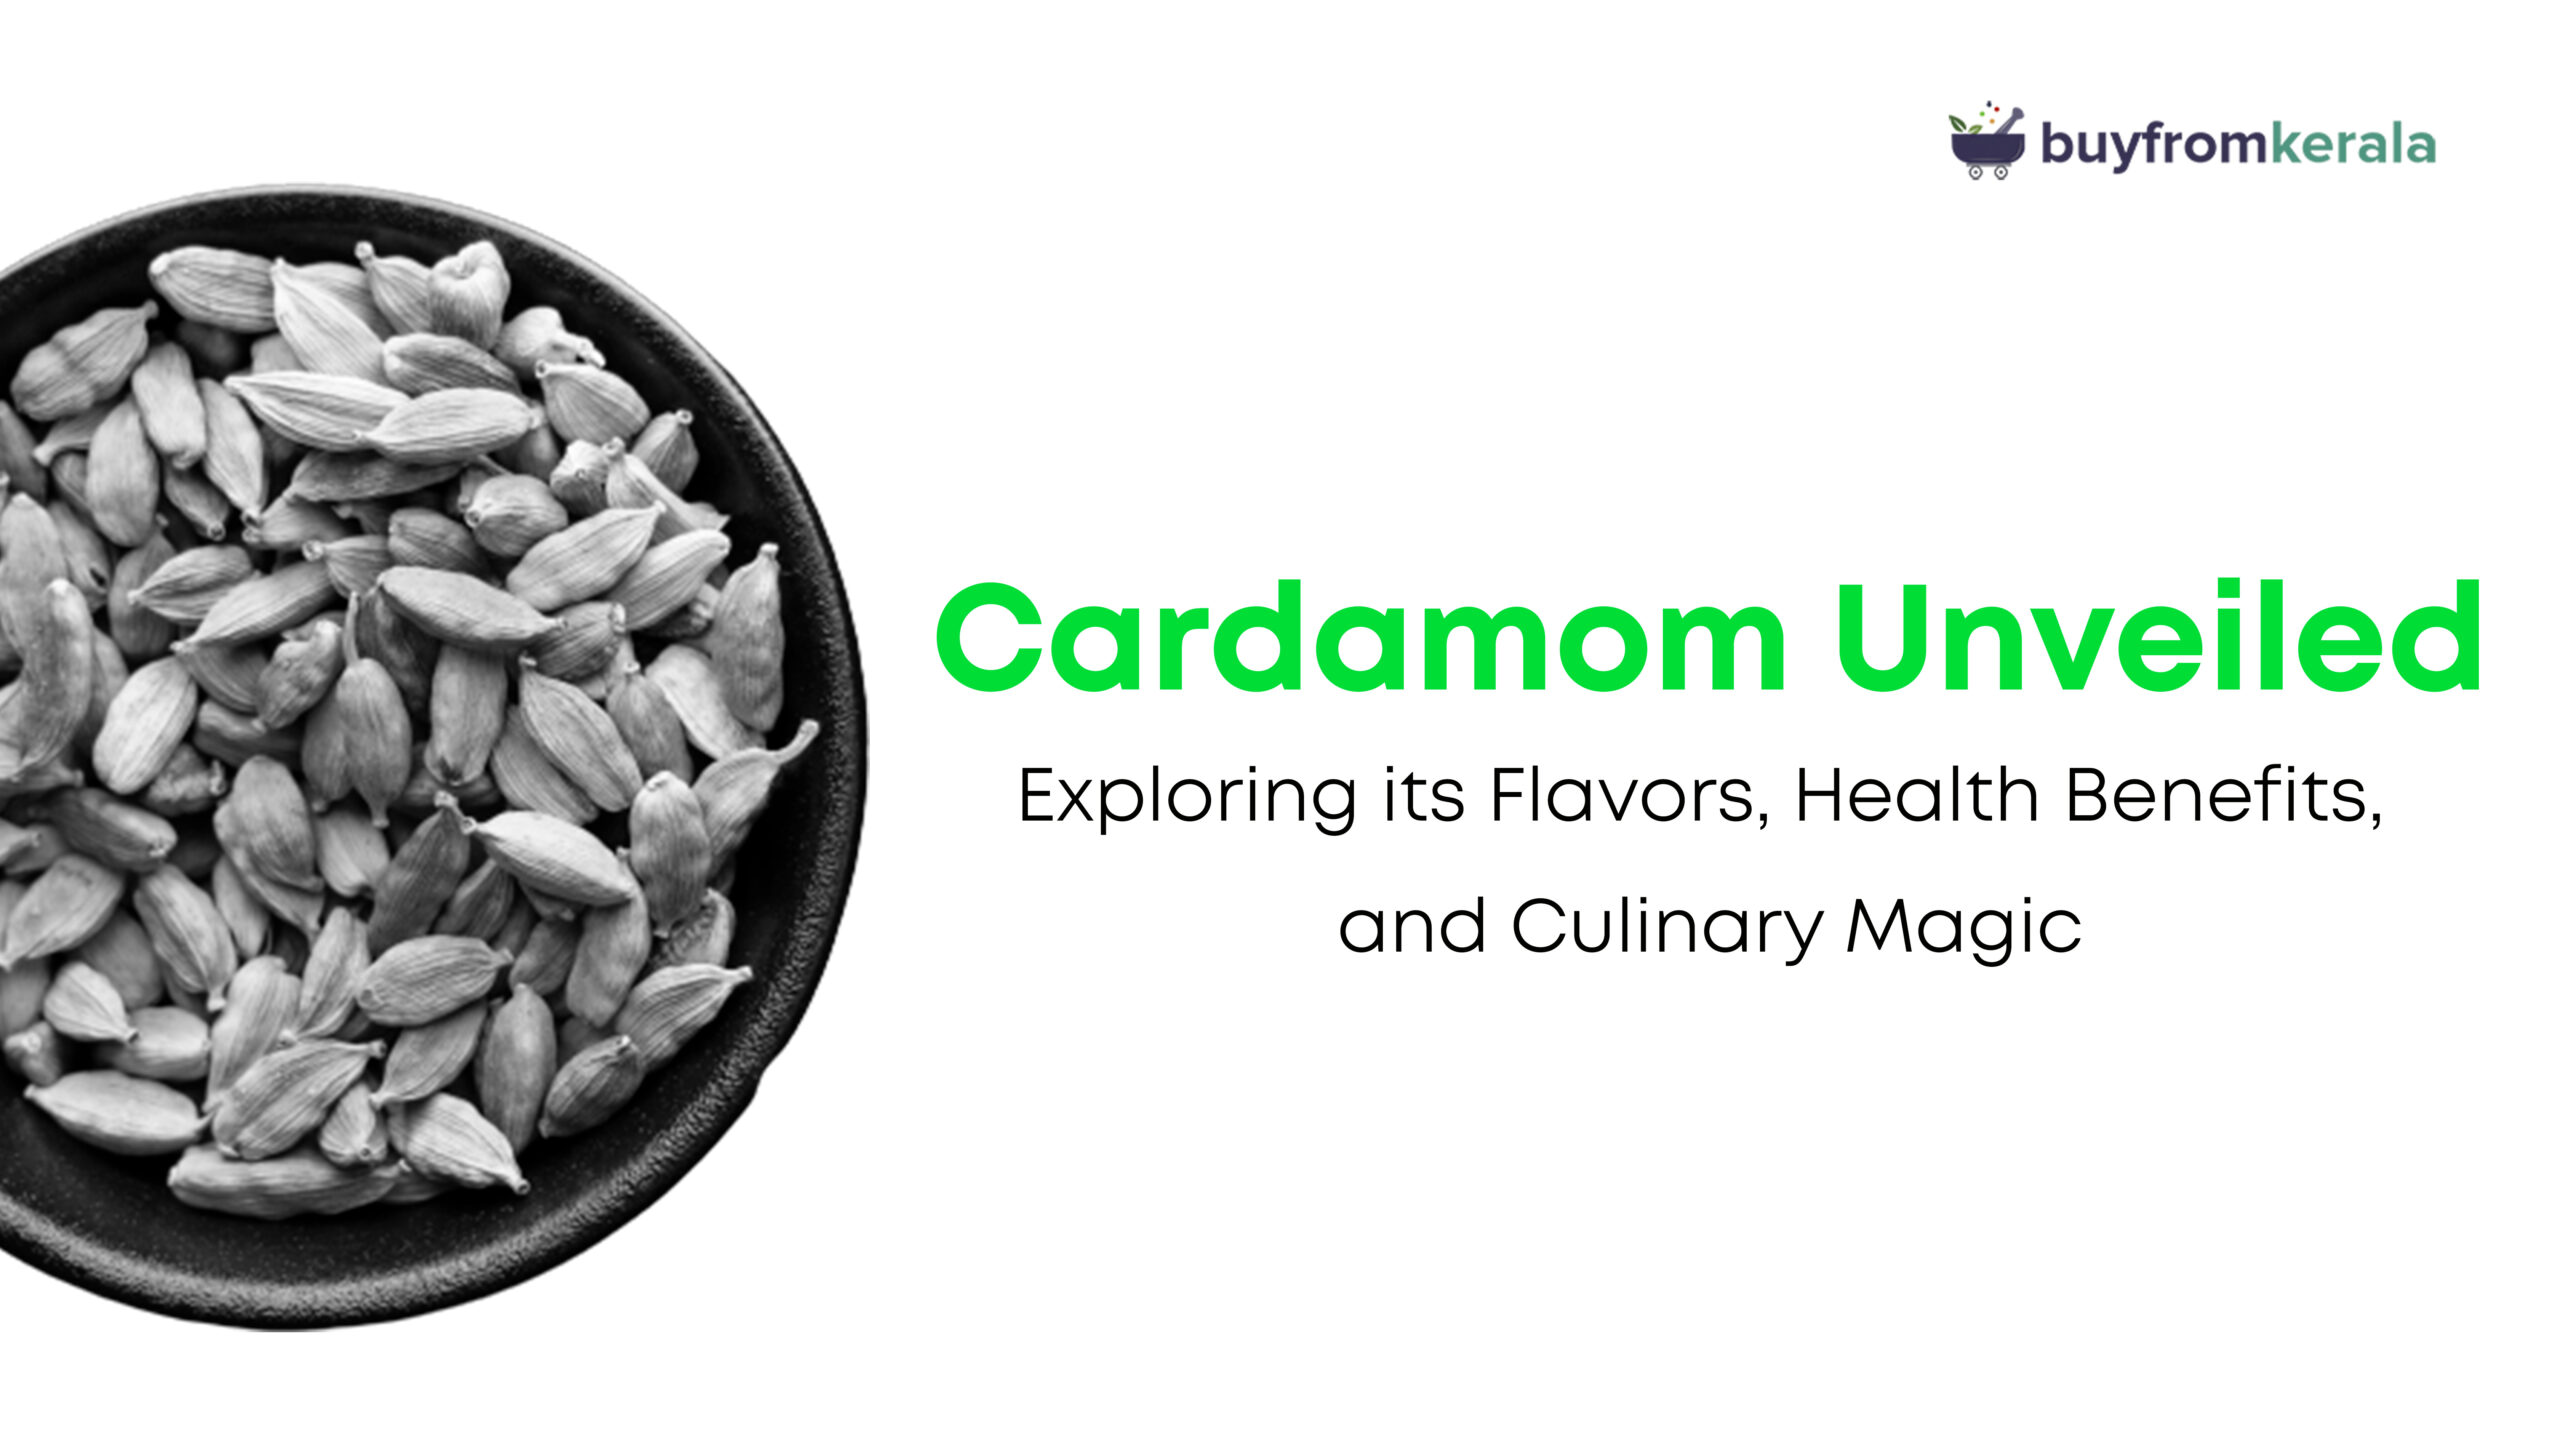 Cardamom Unveiled: Exploring its Flavors, Health Benefits, and Culinary Magic